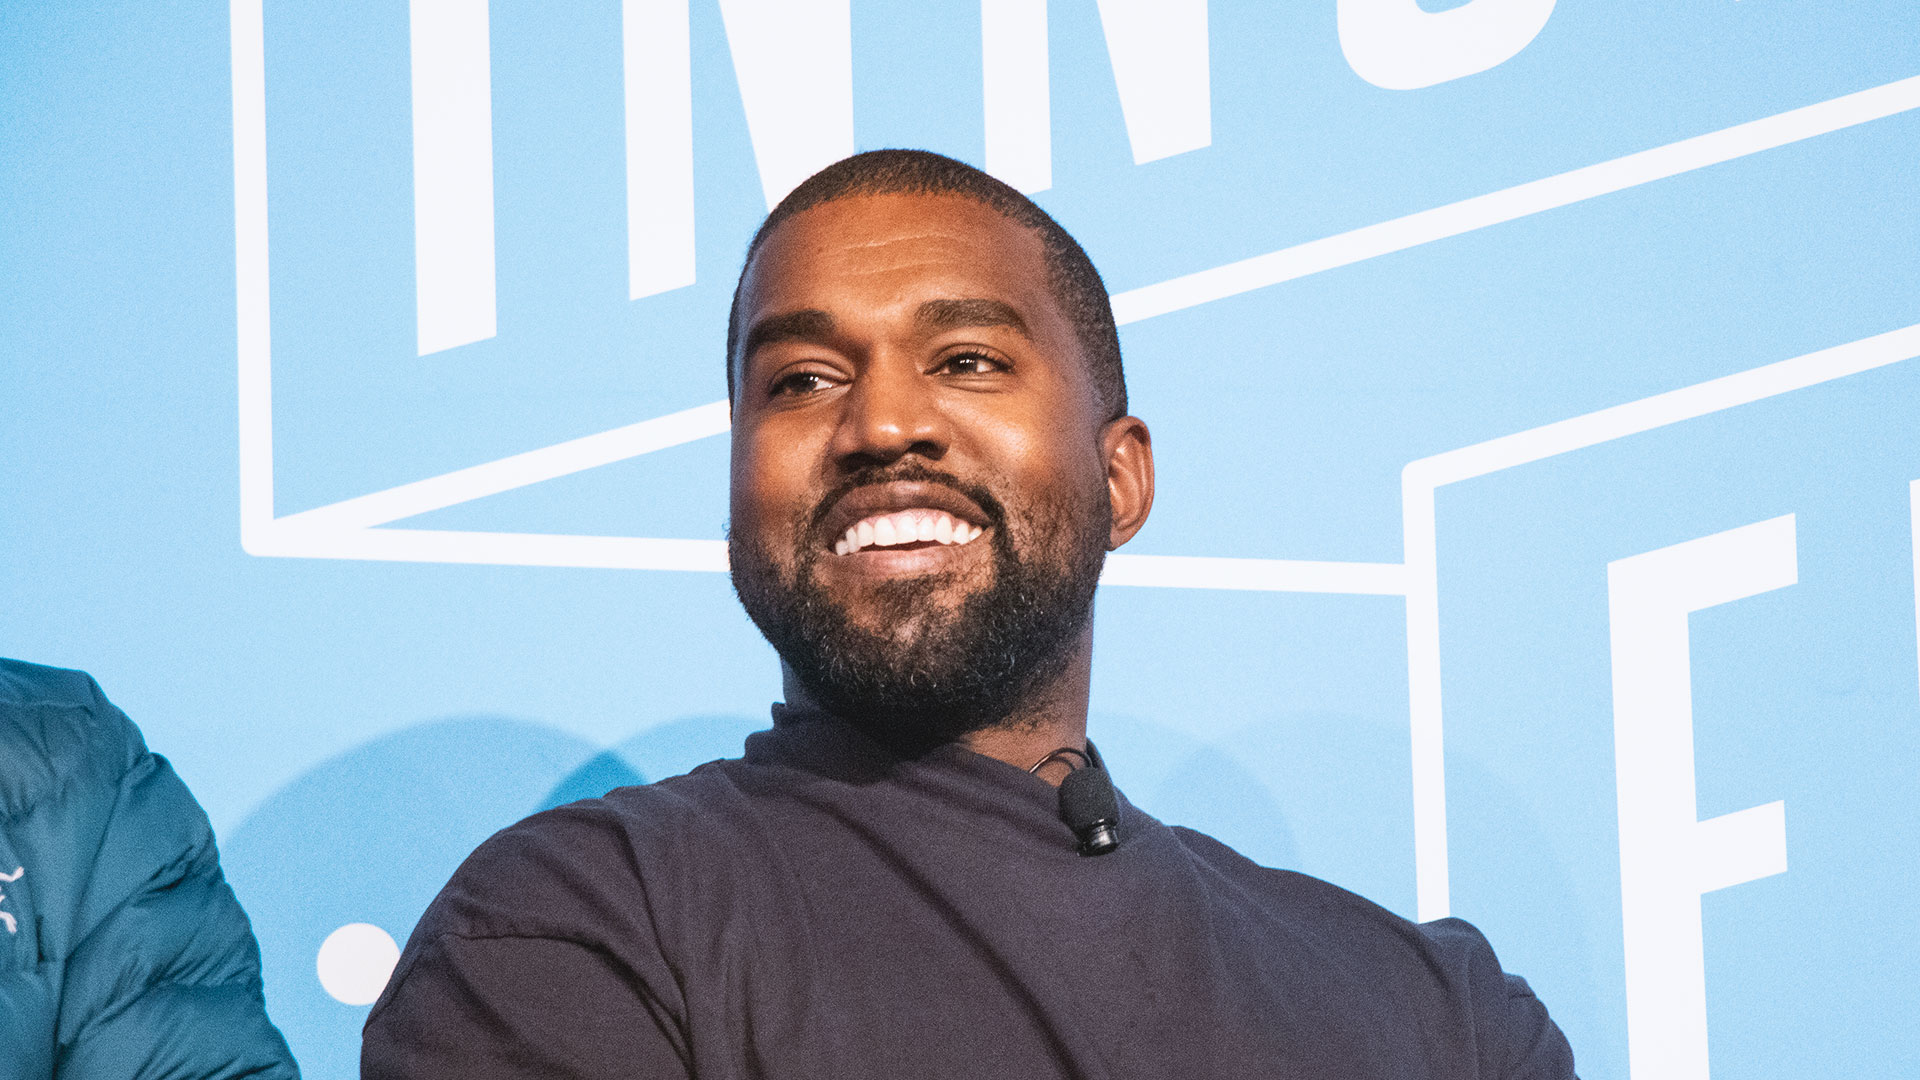 Kanye West sells his documentary series to Netflix